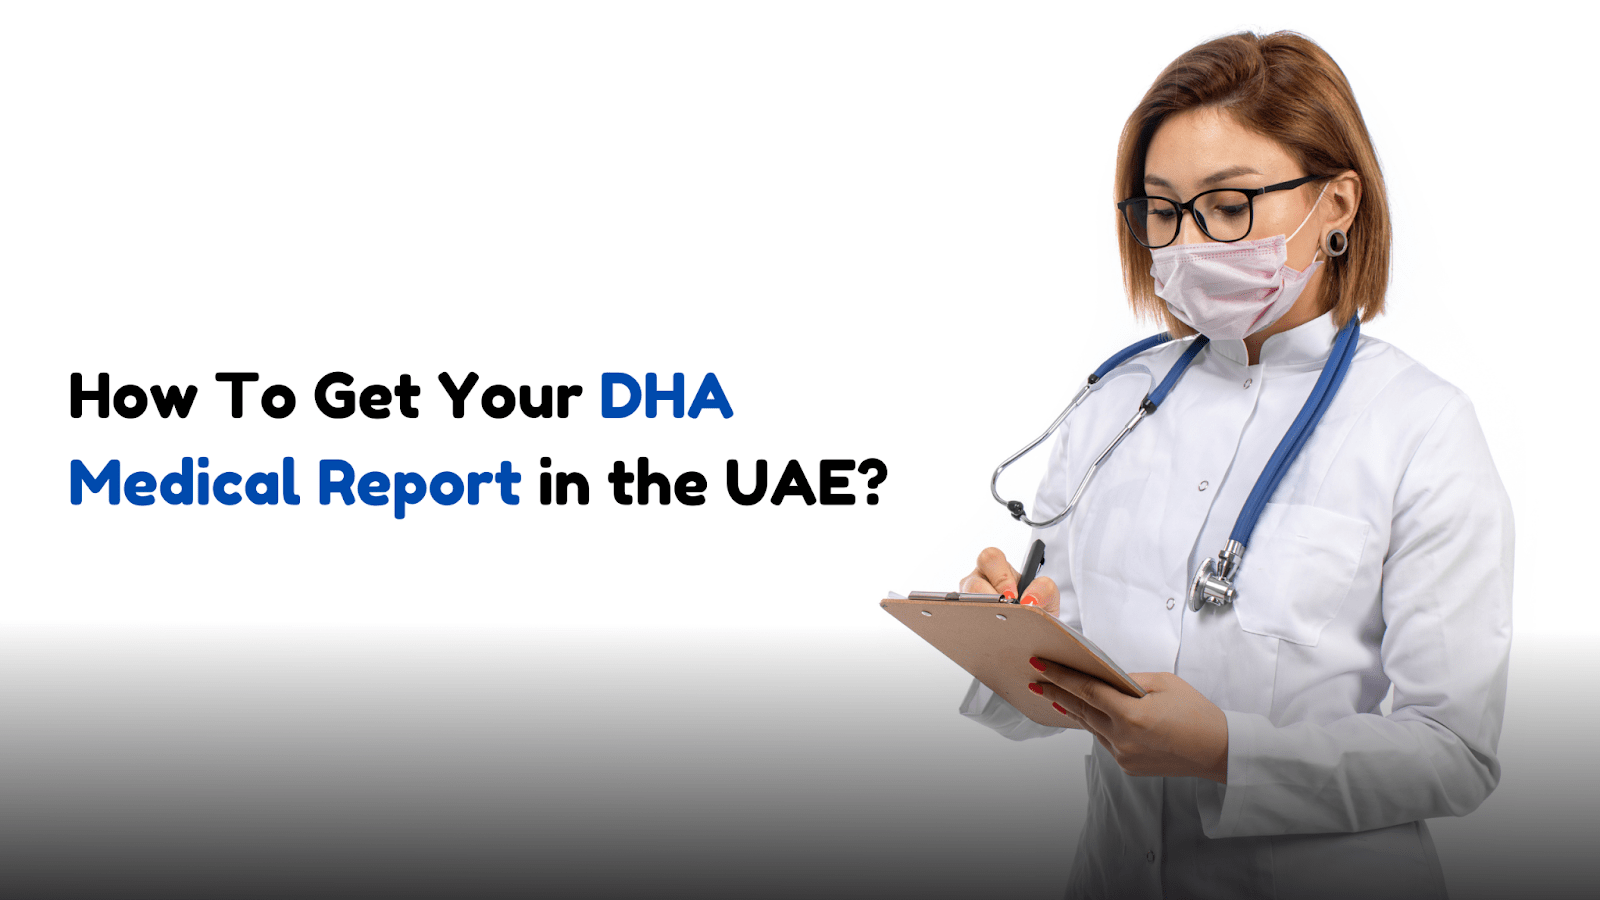 How to Get a DHA Medical Report in The UAE?